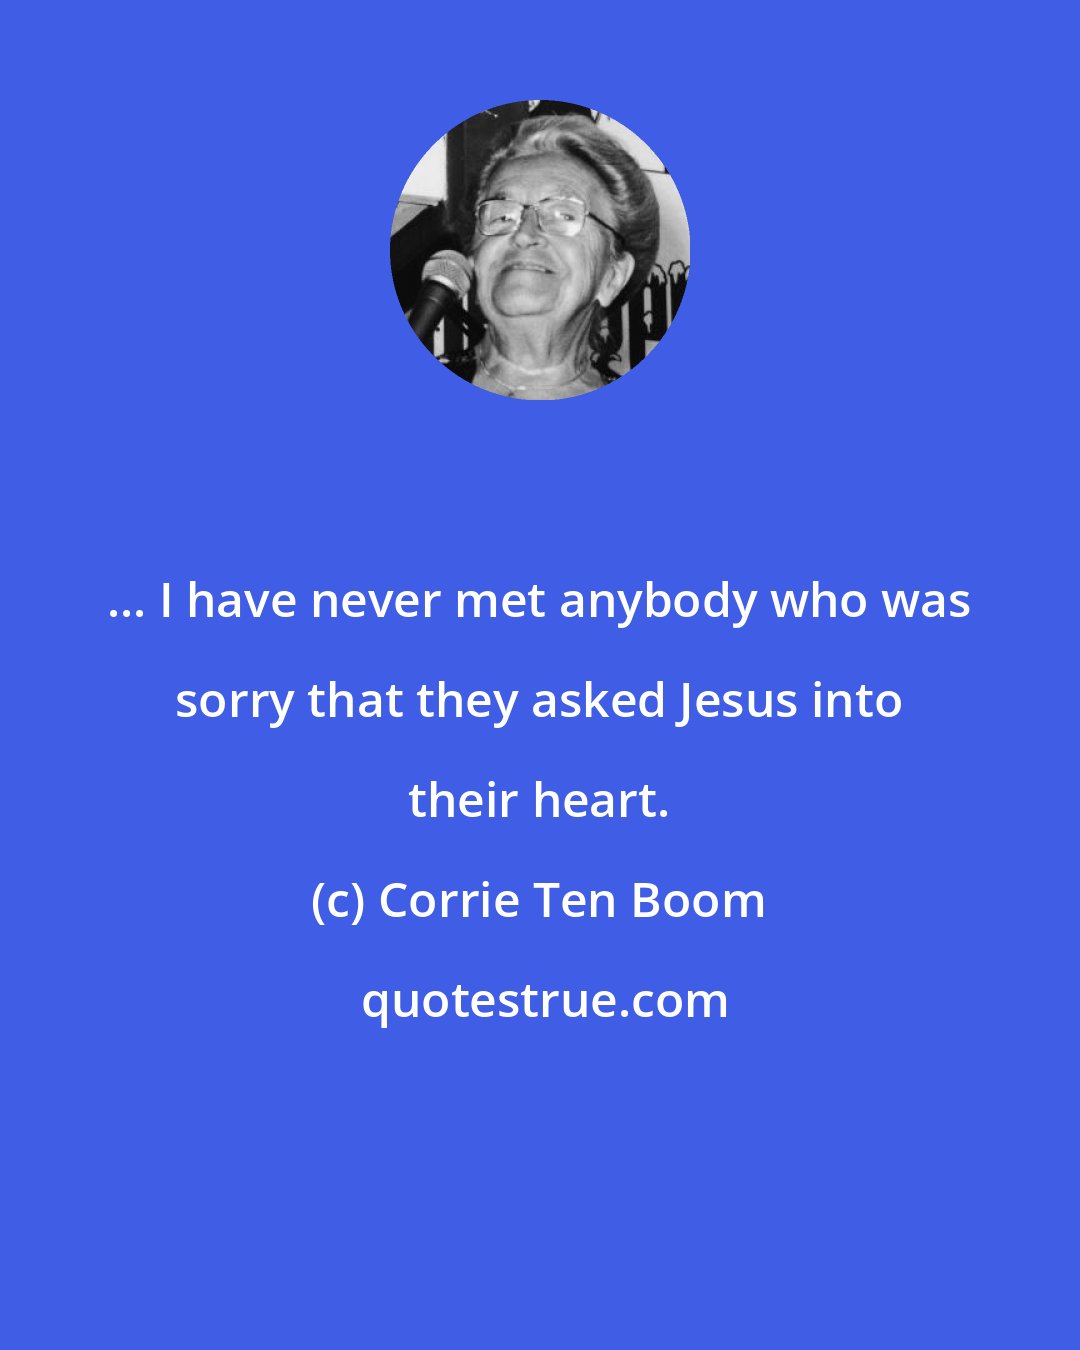 Corrie Ten Boom: ... I have never met anybody who was sorry that they asked Jesus into their heart.